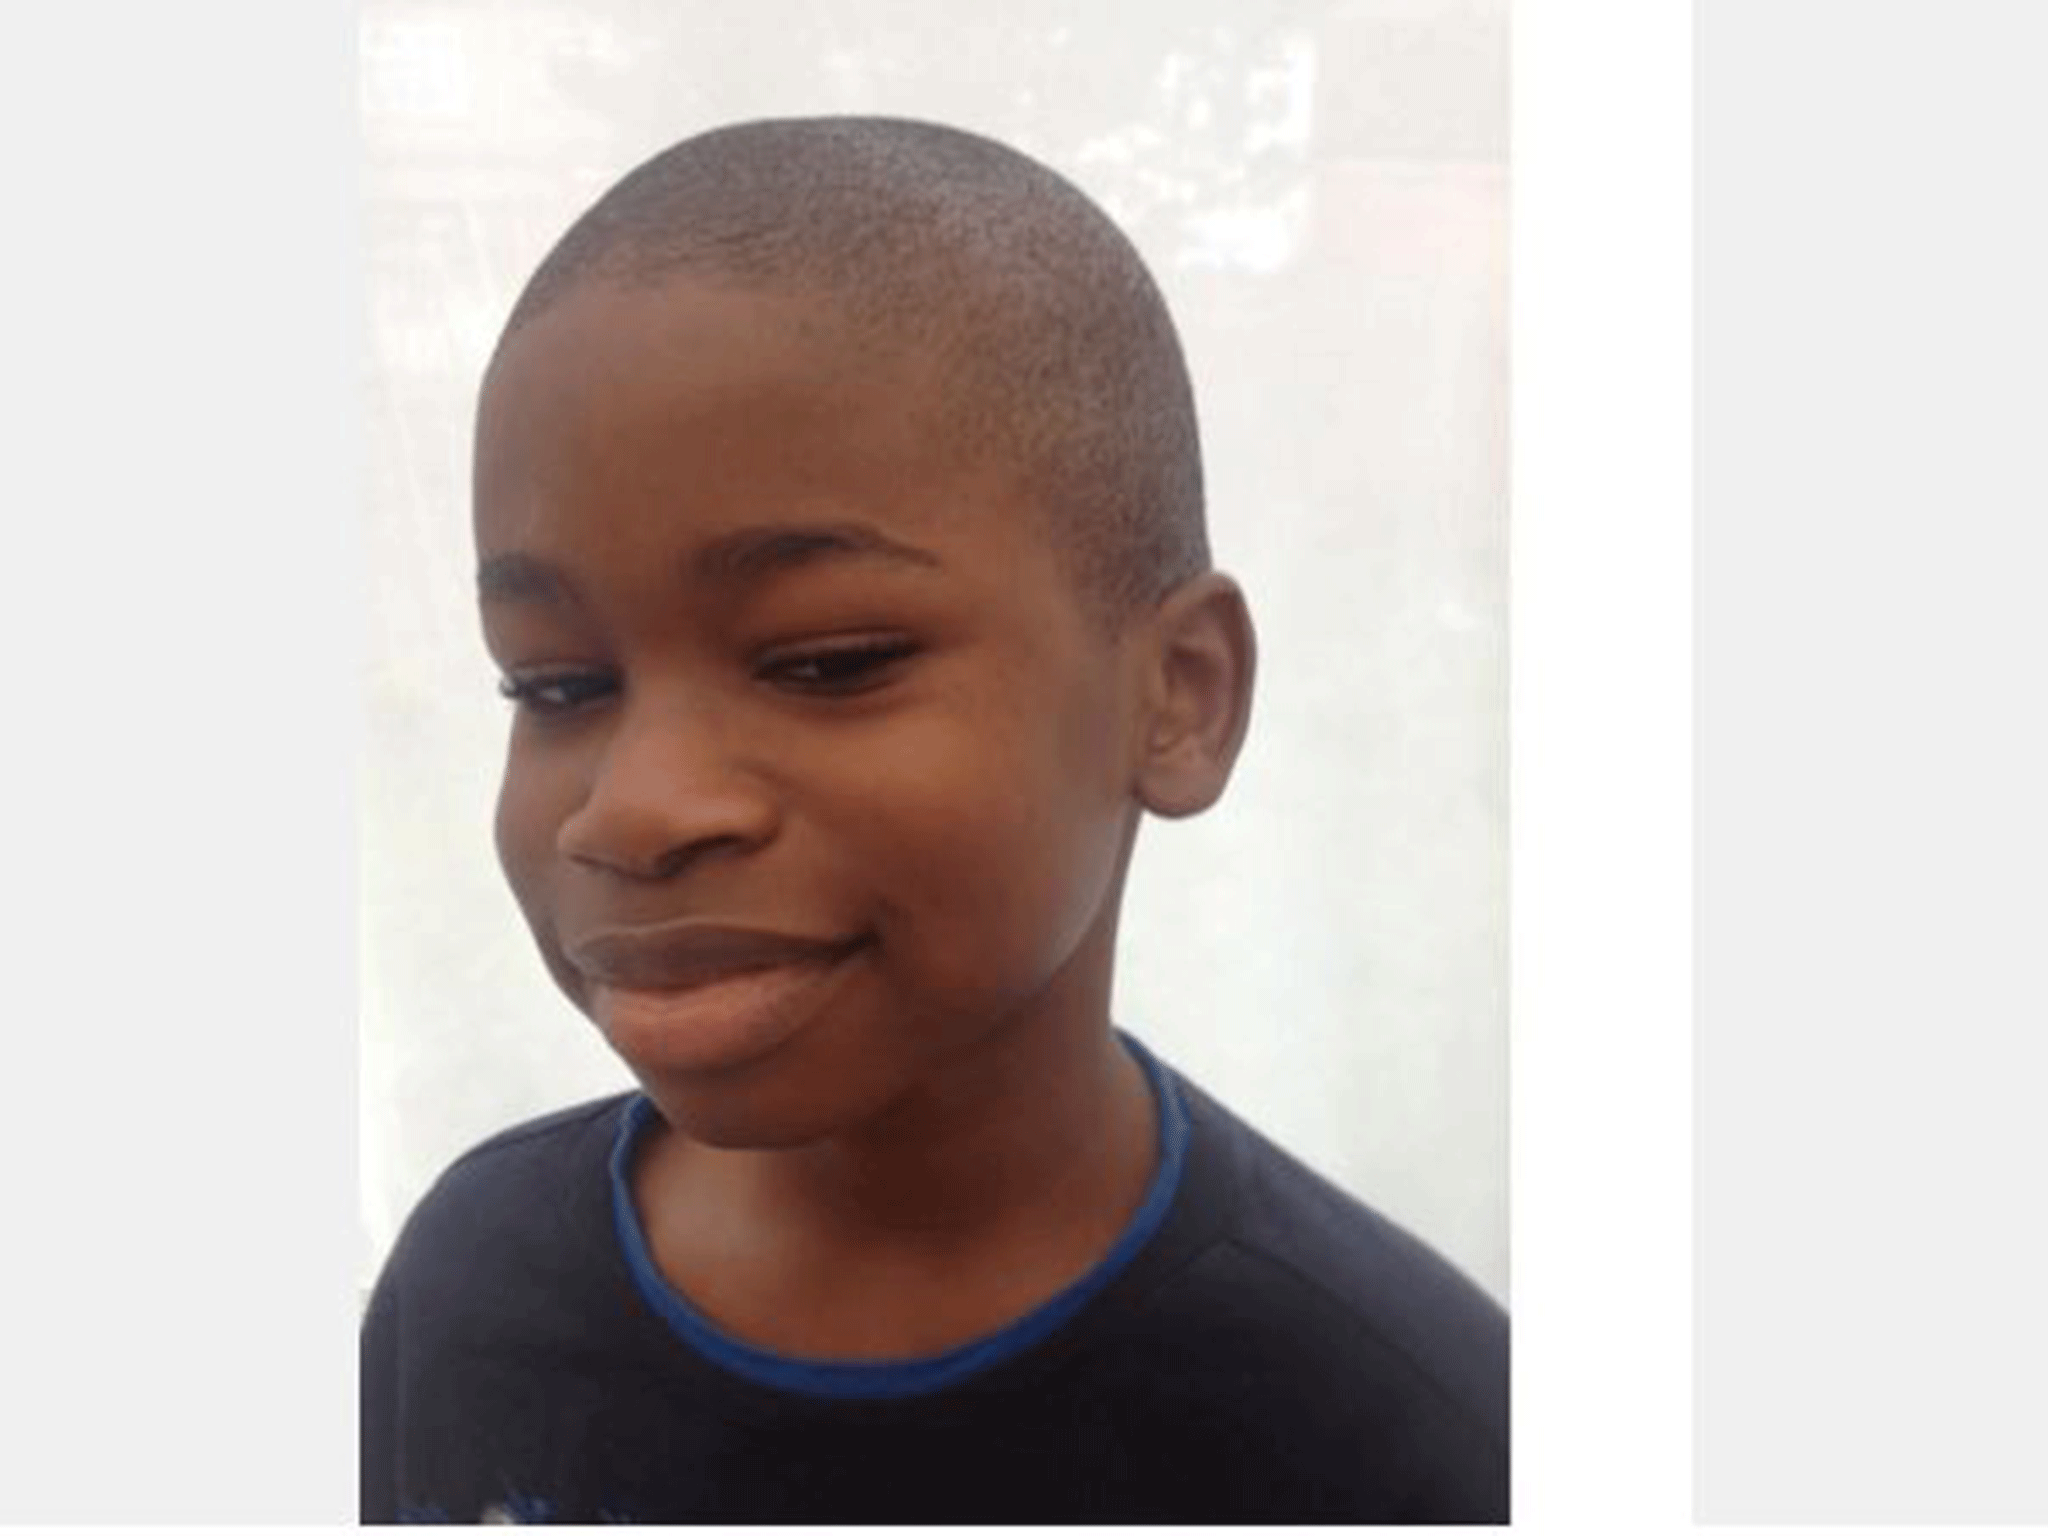 Abraham Ojo, the missing 11-year-old from Tottenham in London